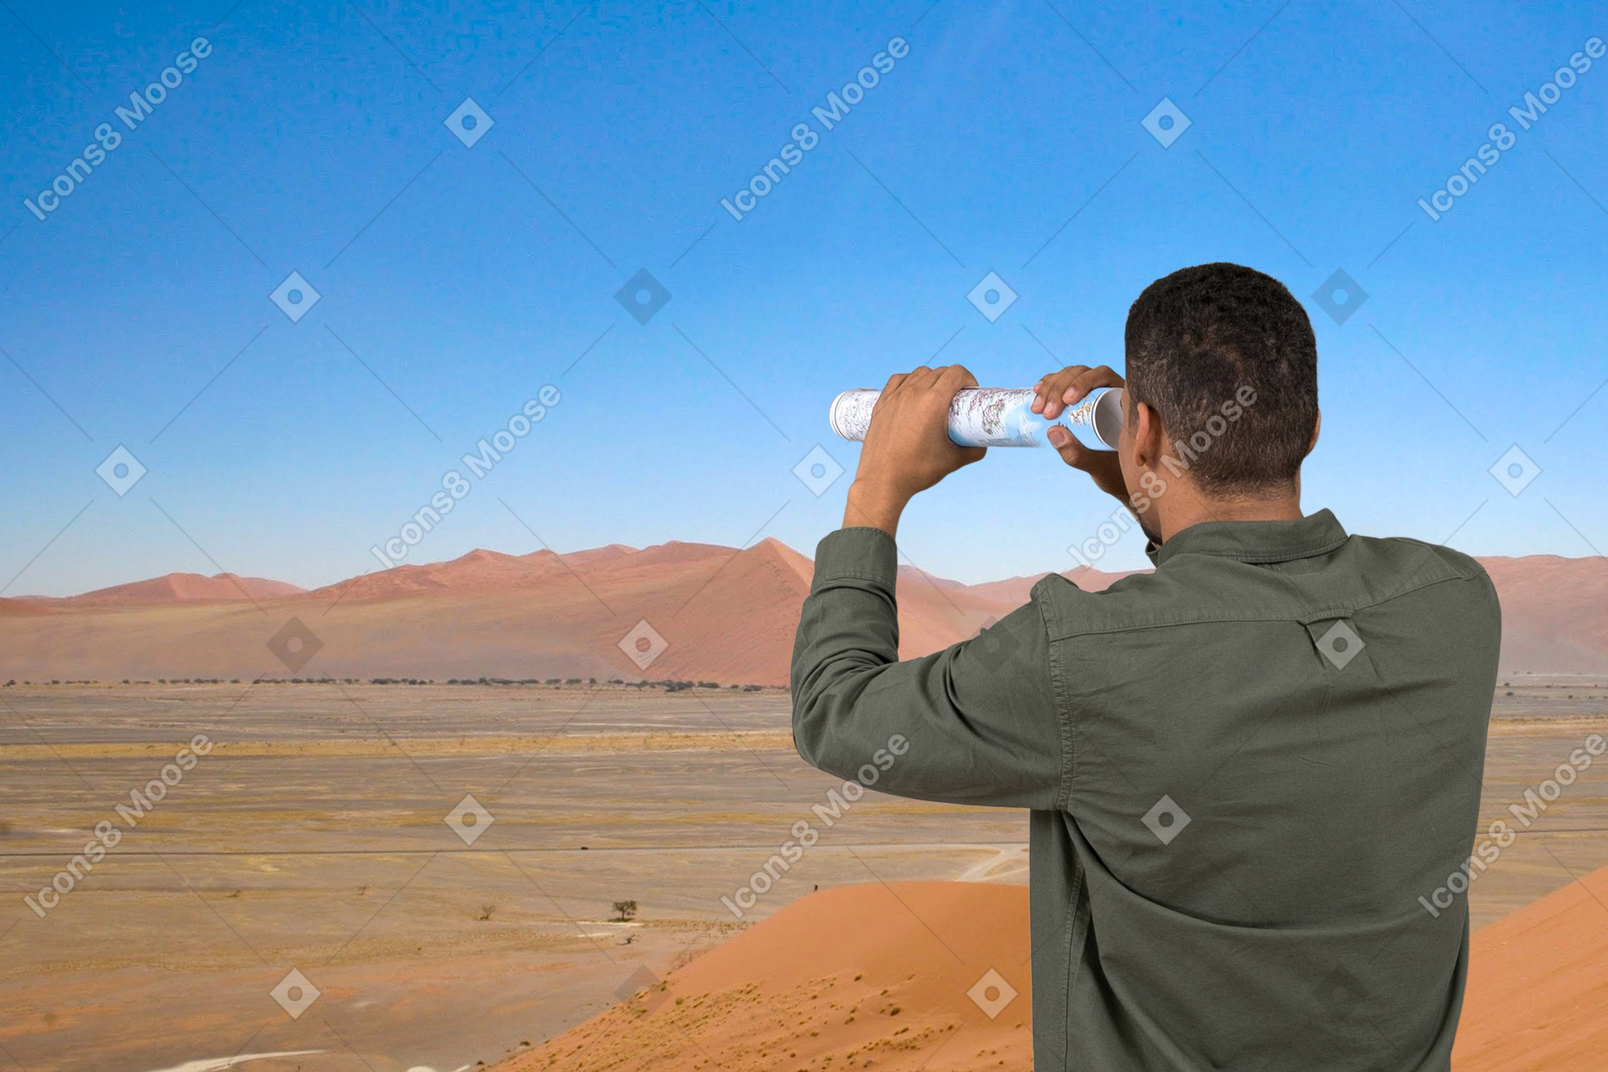 Man taking a photo of the landscape